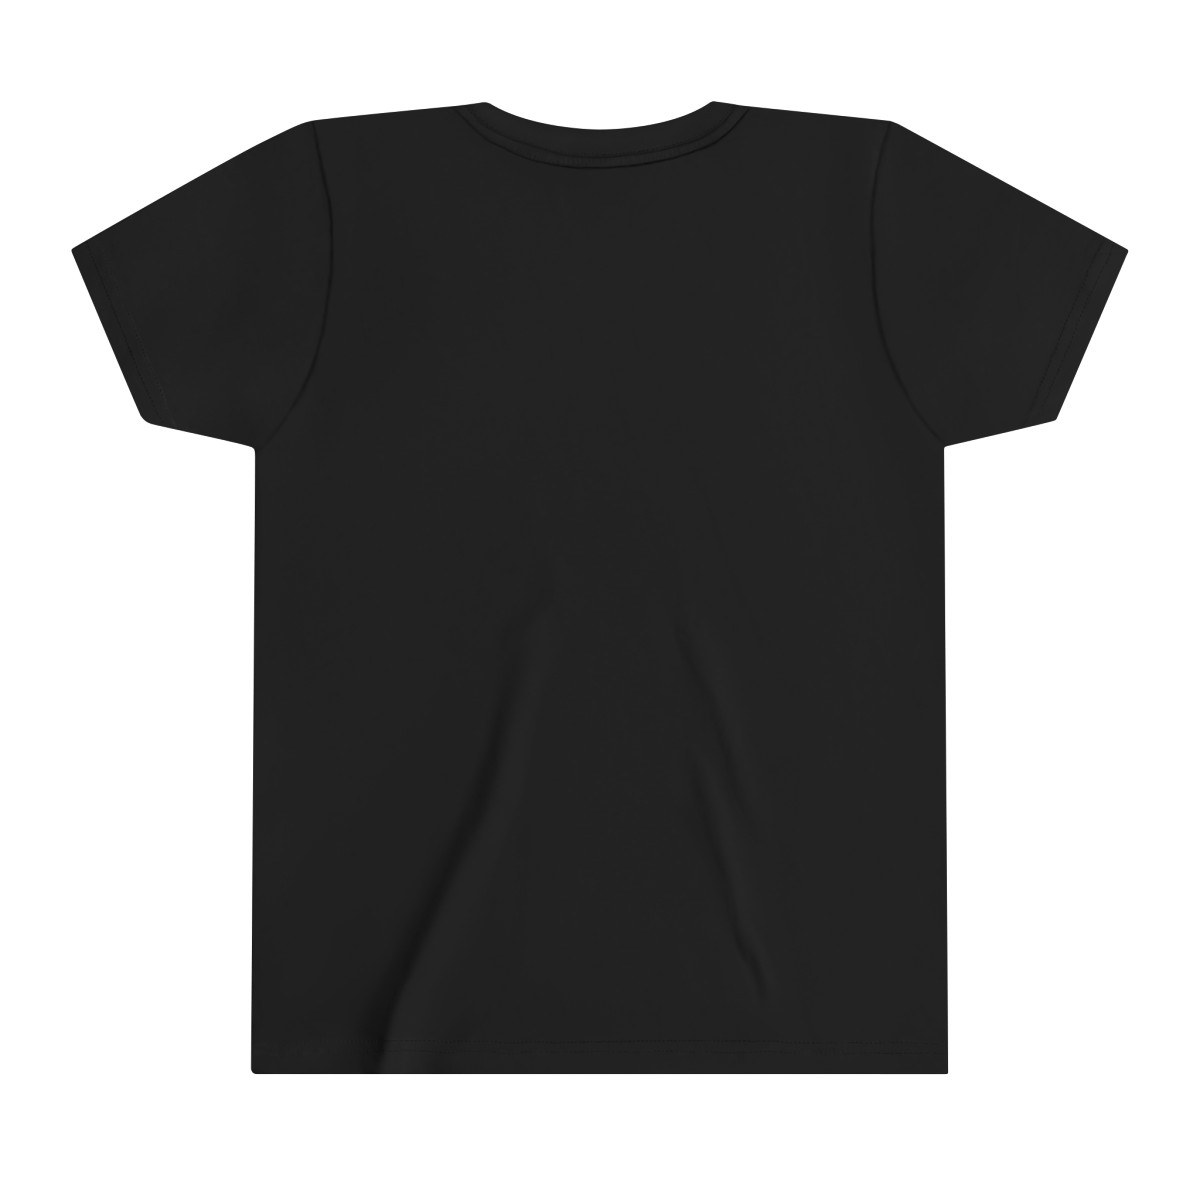 Youth PhxSoul.com Short Sleeve Dark Color Tee product thumbnail image